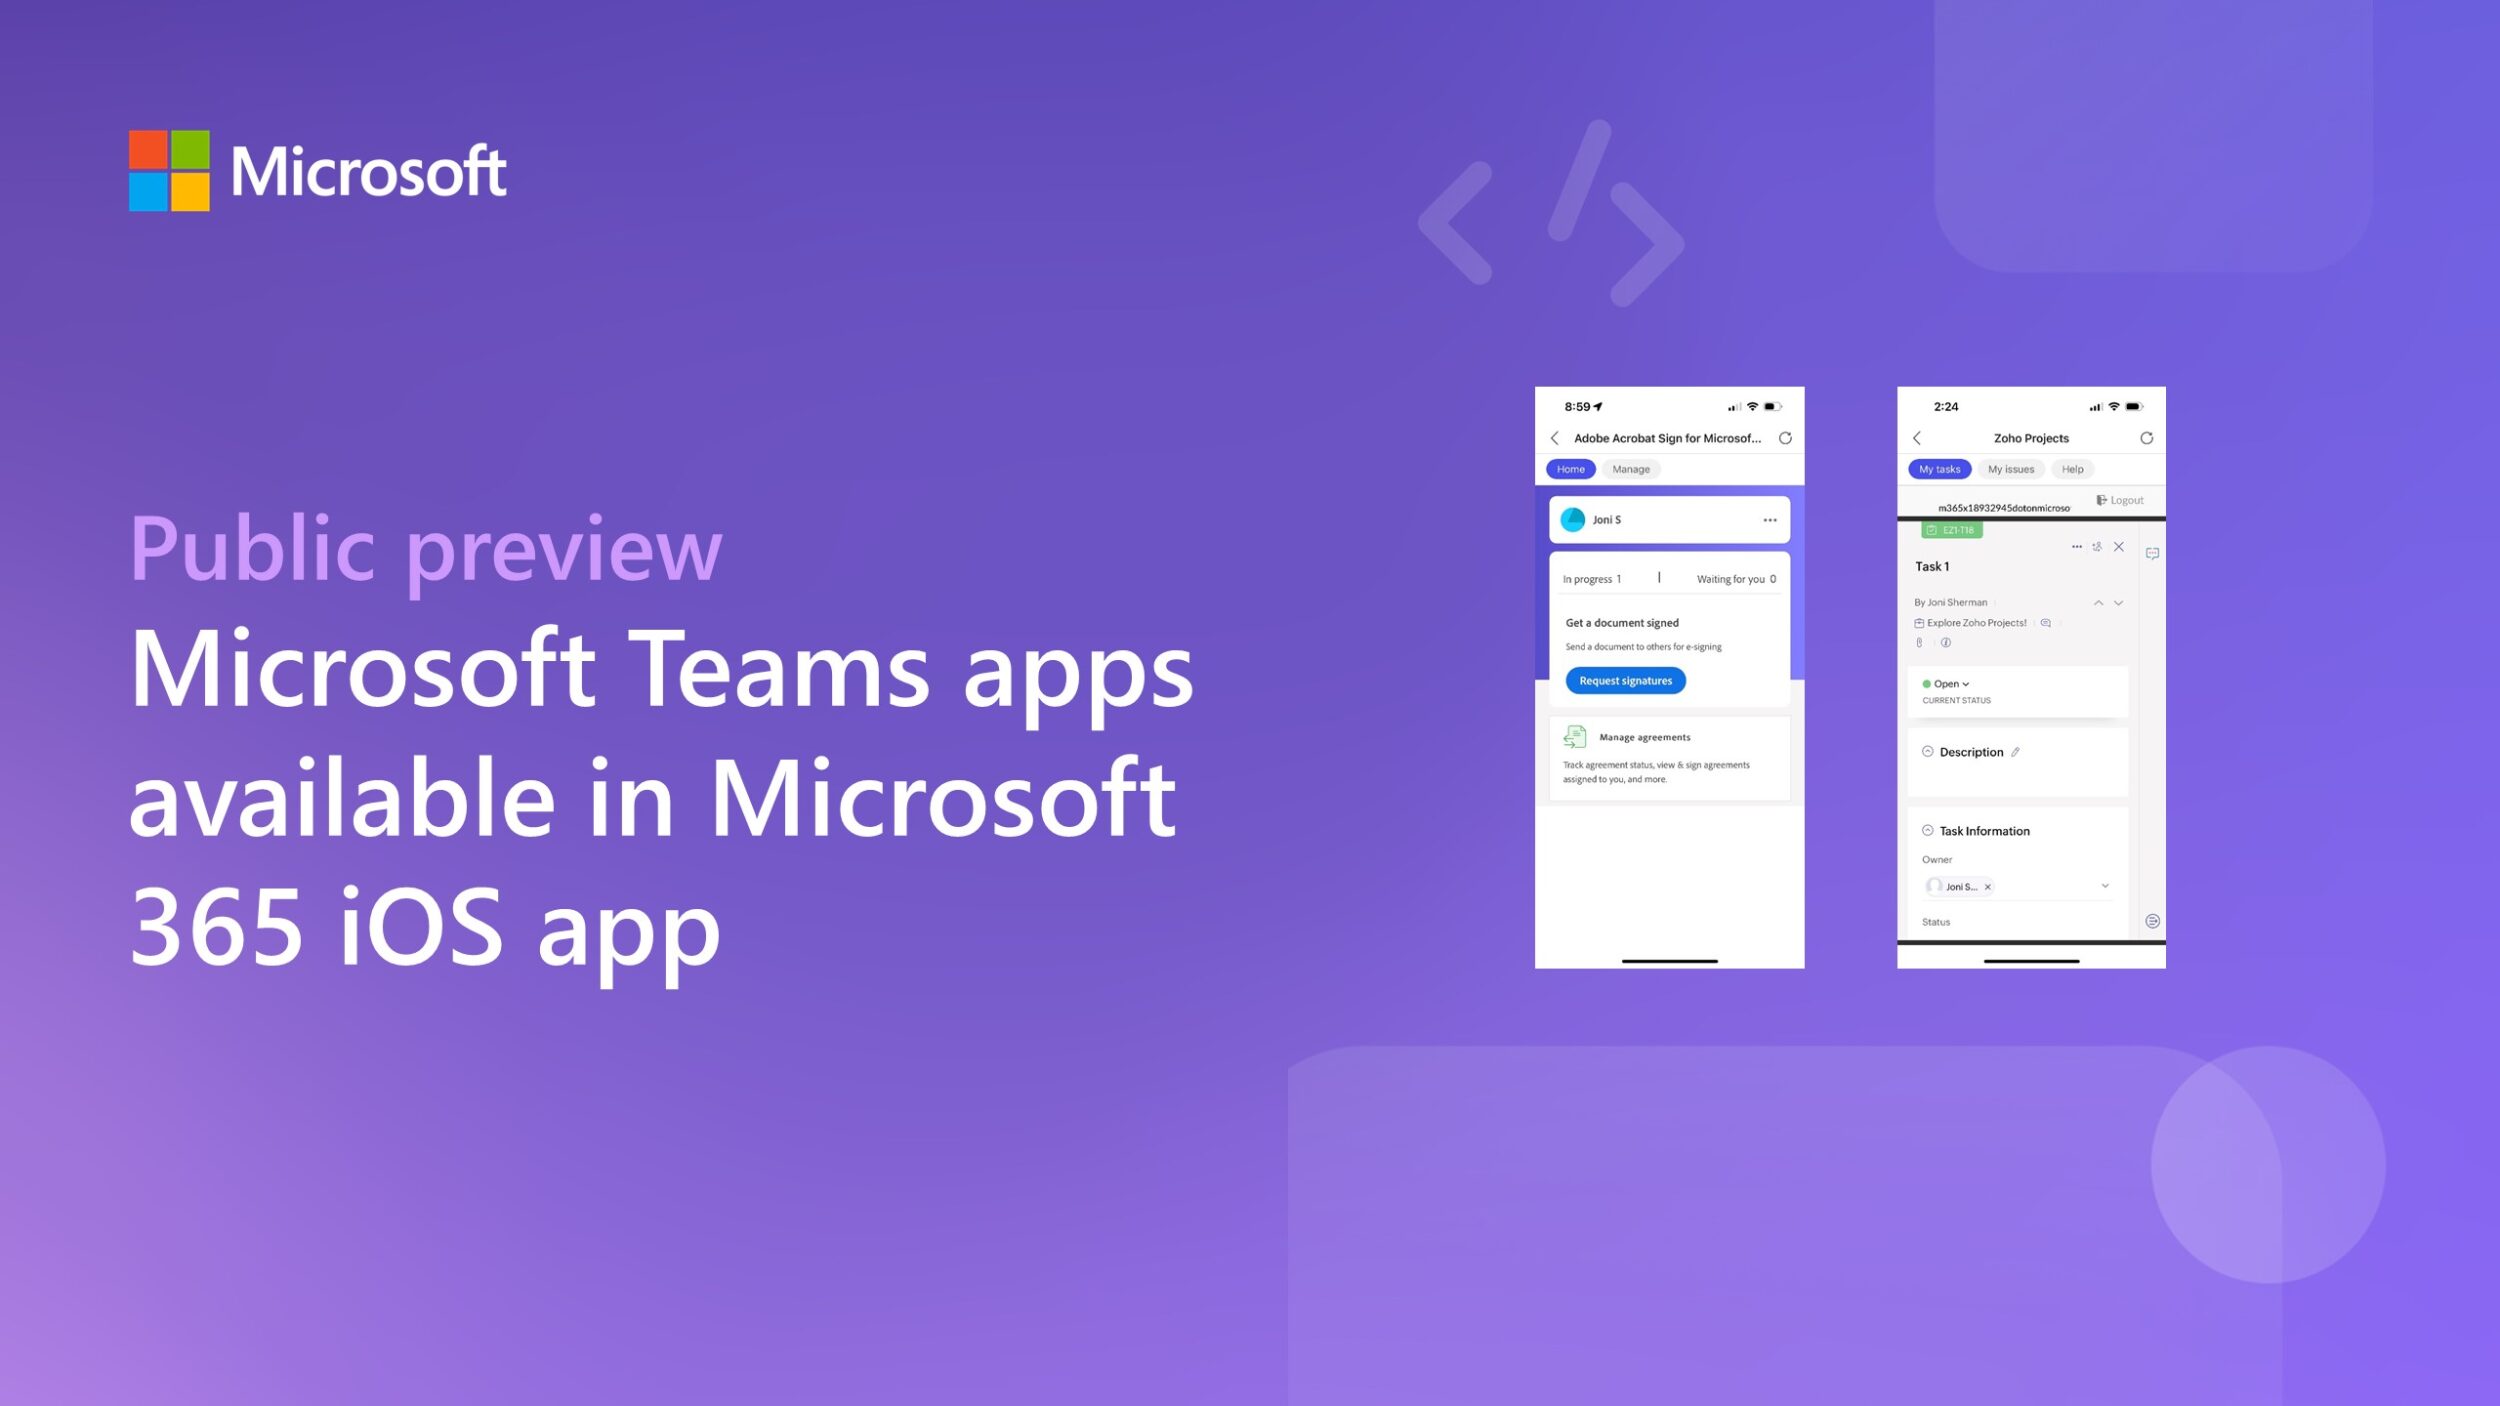 Microsoft Teams apps now available in public preview in the Microsoft 365 iOS app